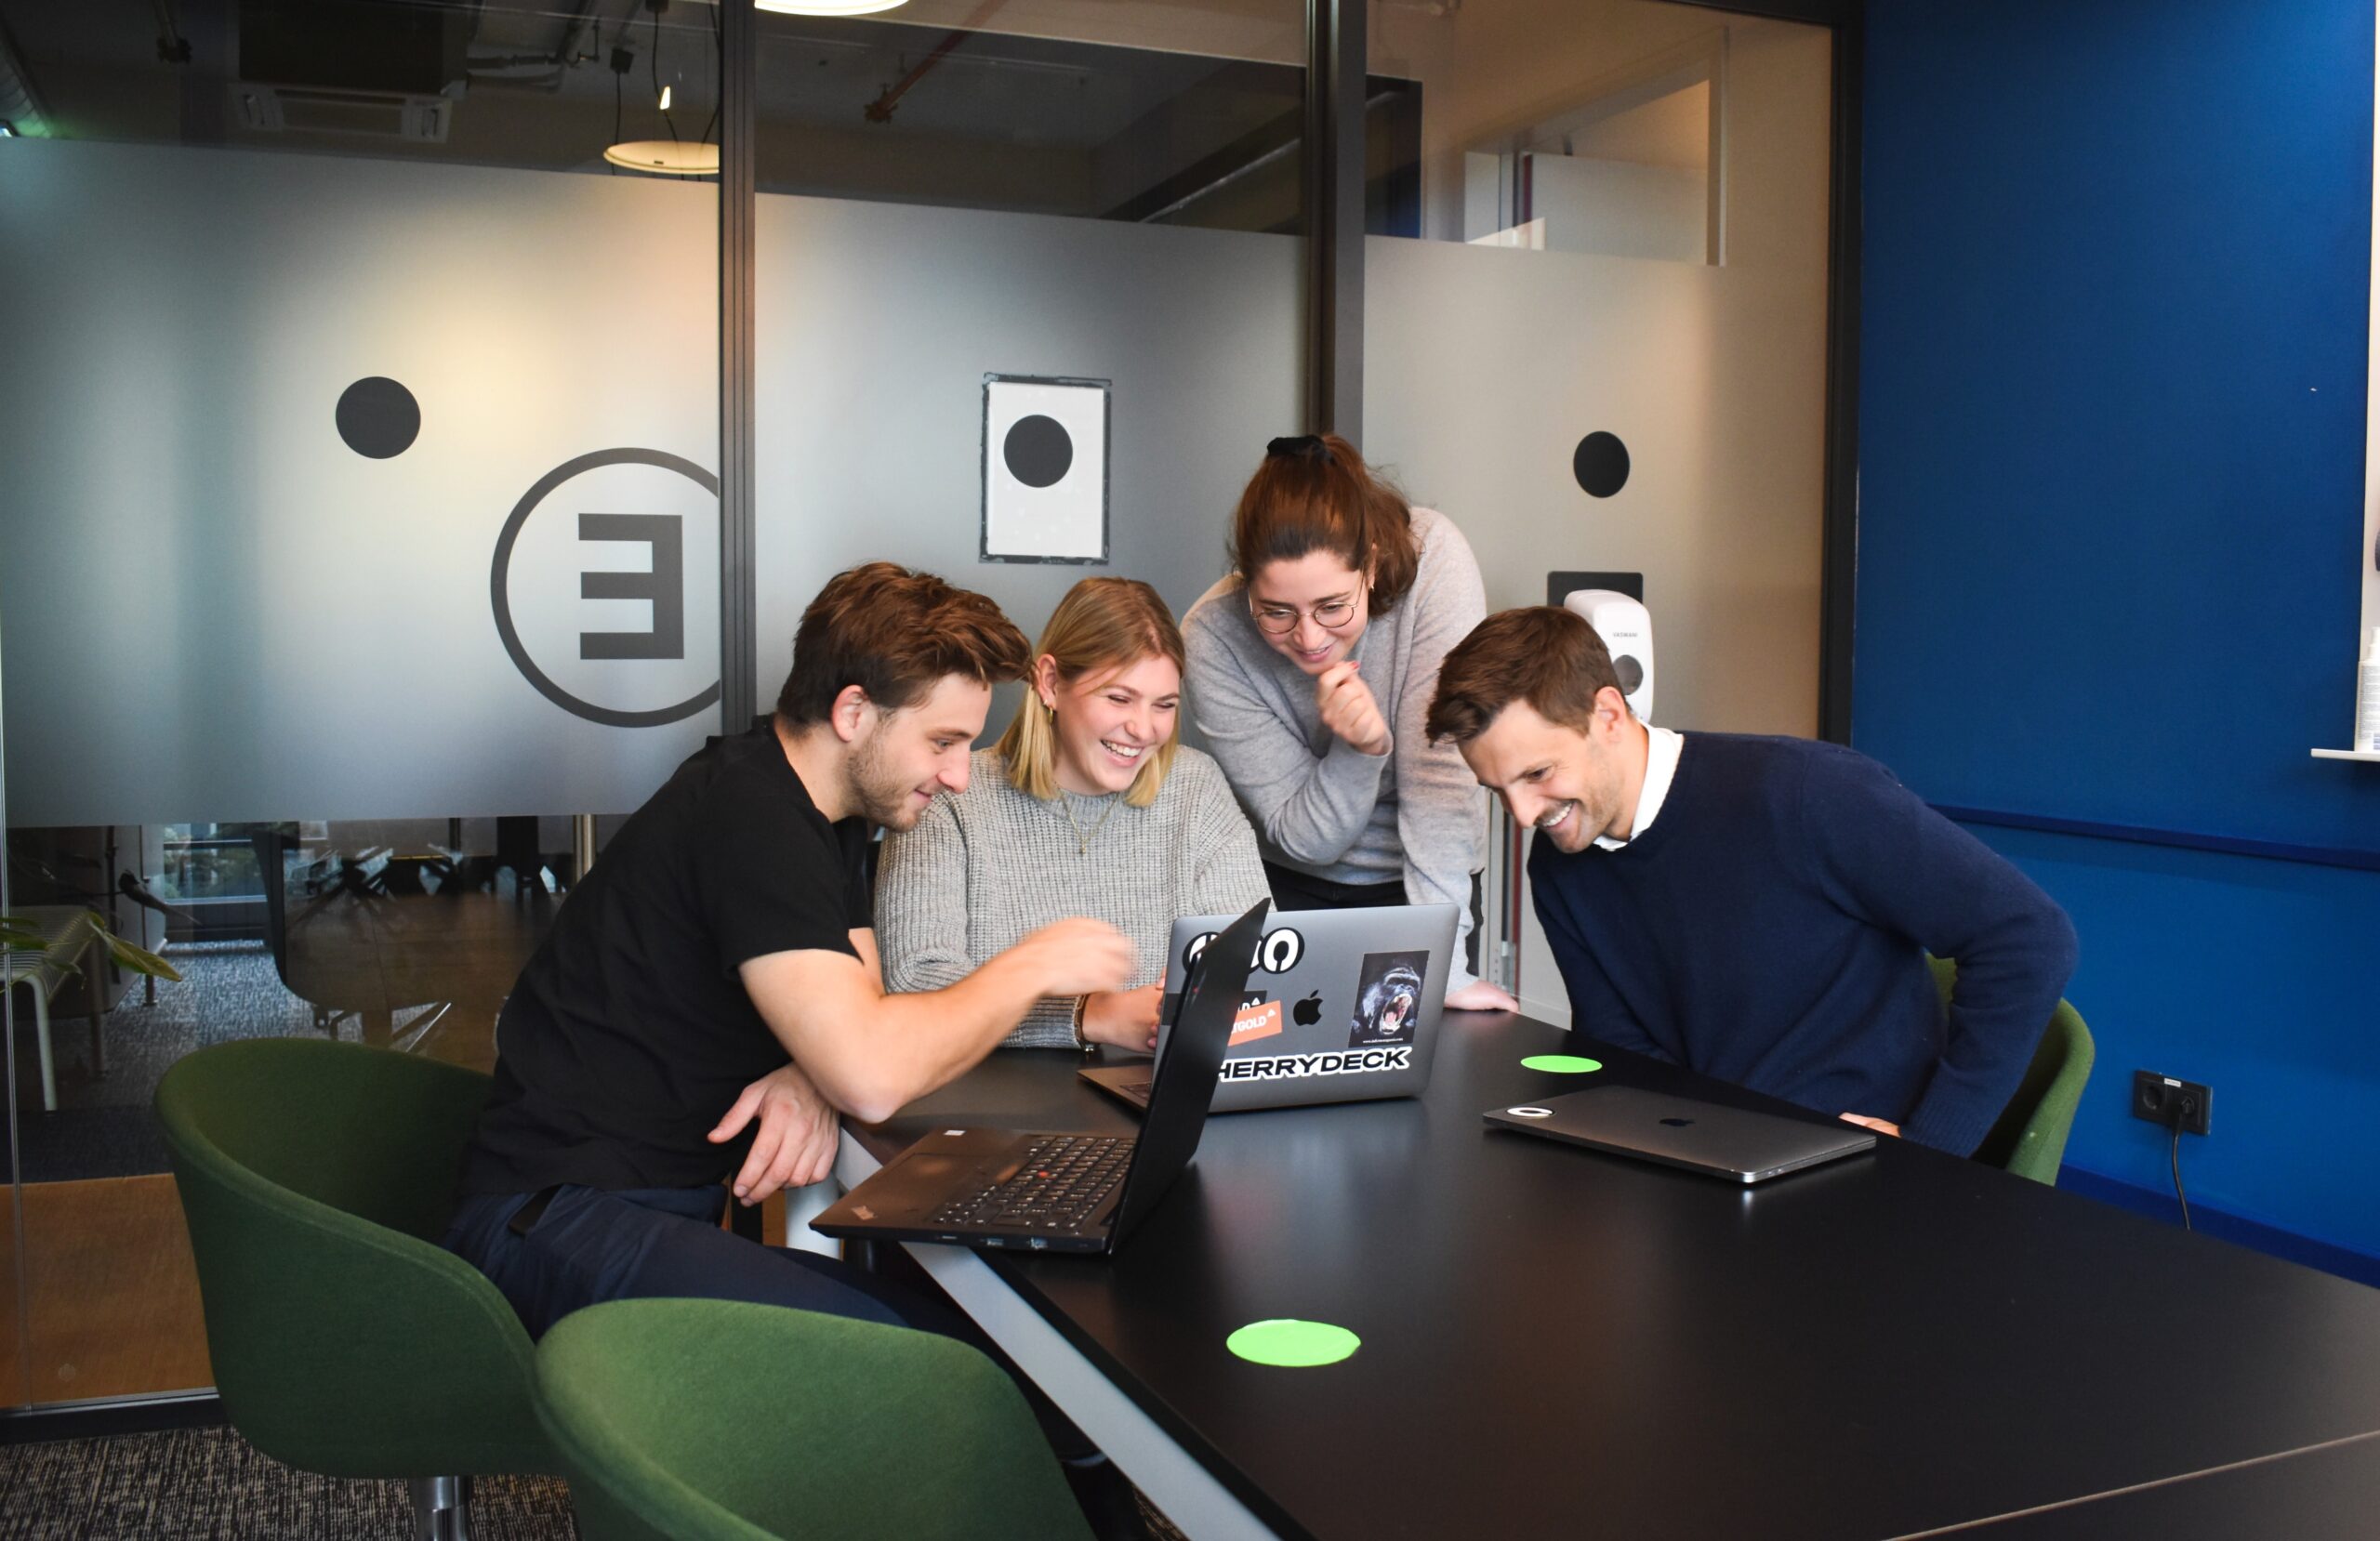 Group of people smiling at a laptop